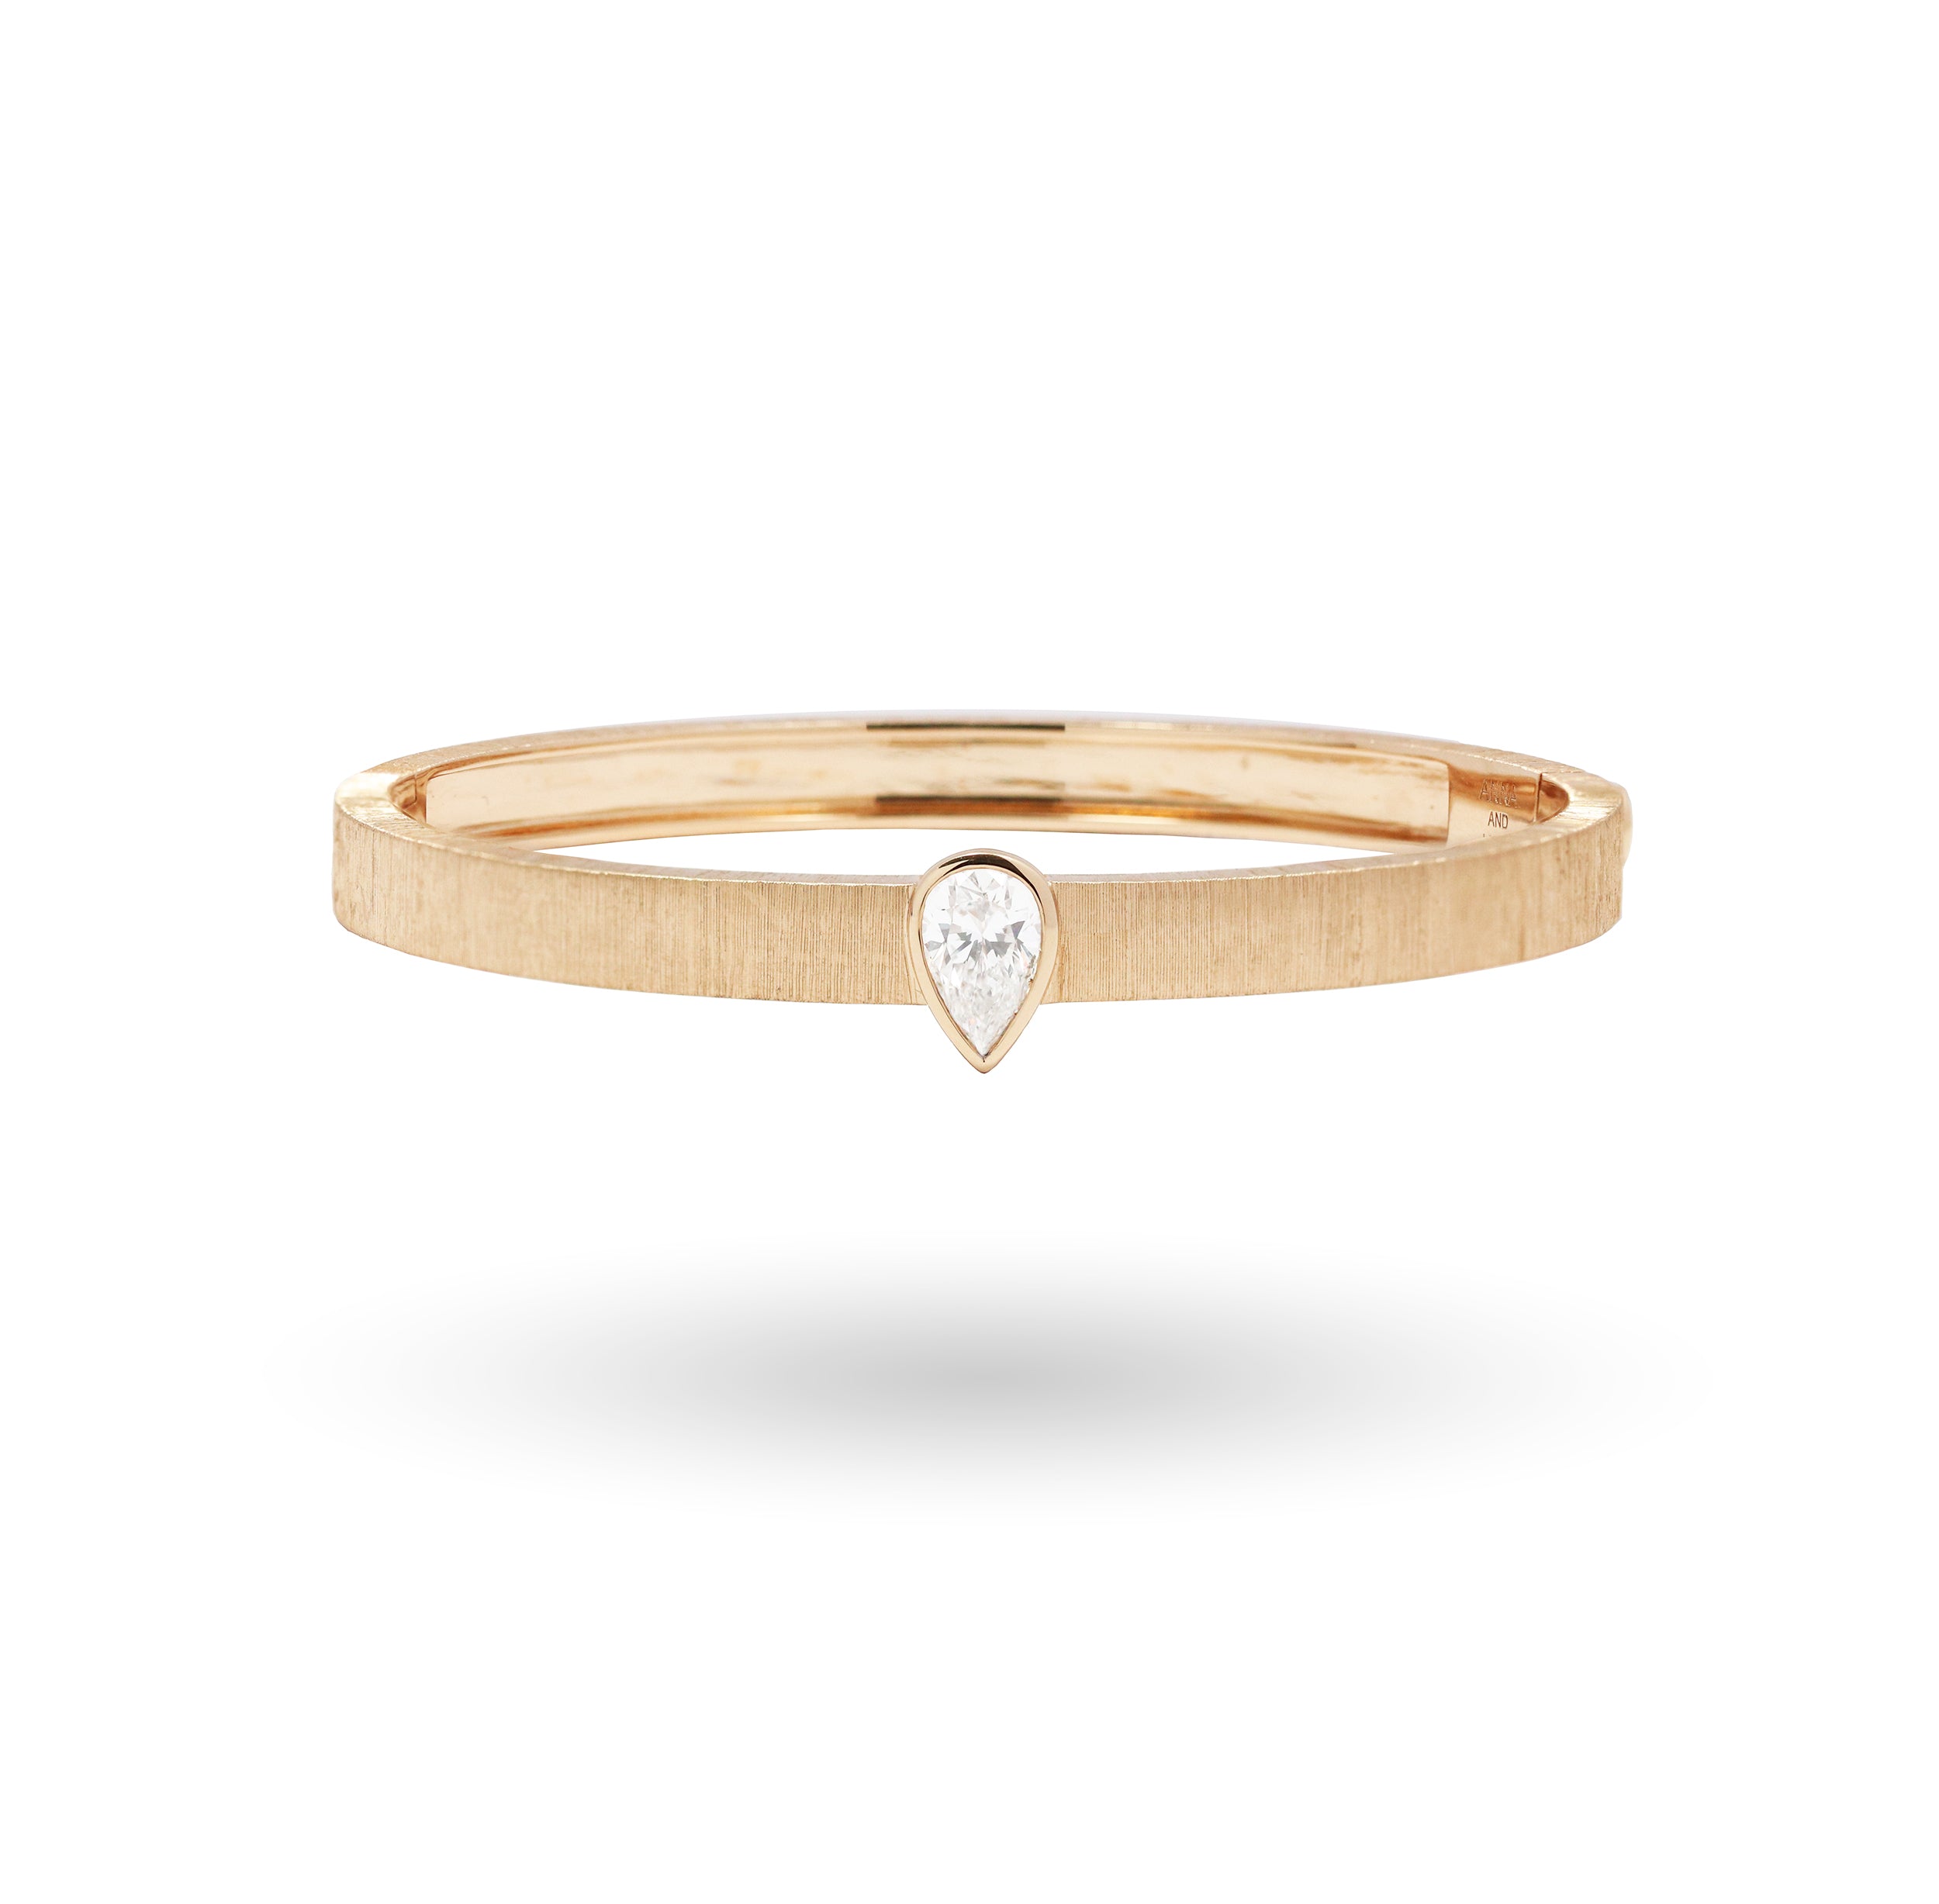 1.01ct Pear Shape Diamond Engraved Bangle in 18K Gold